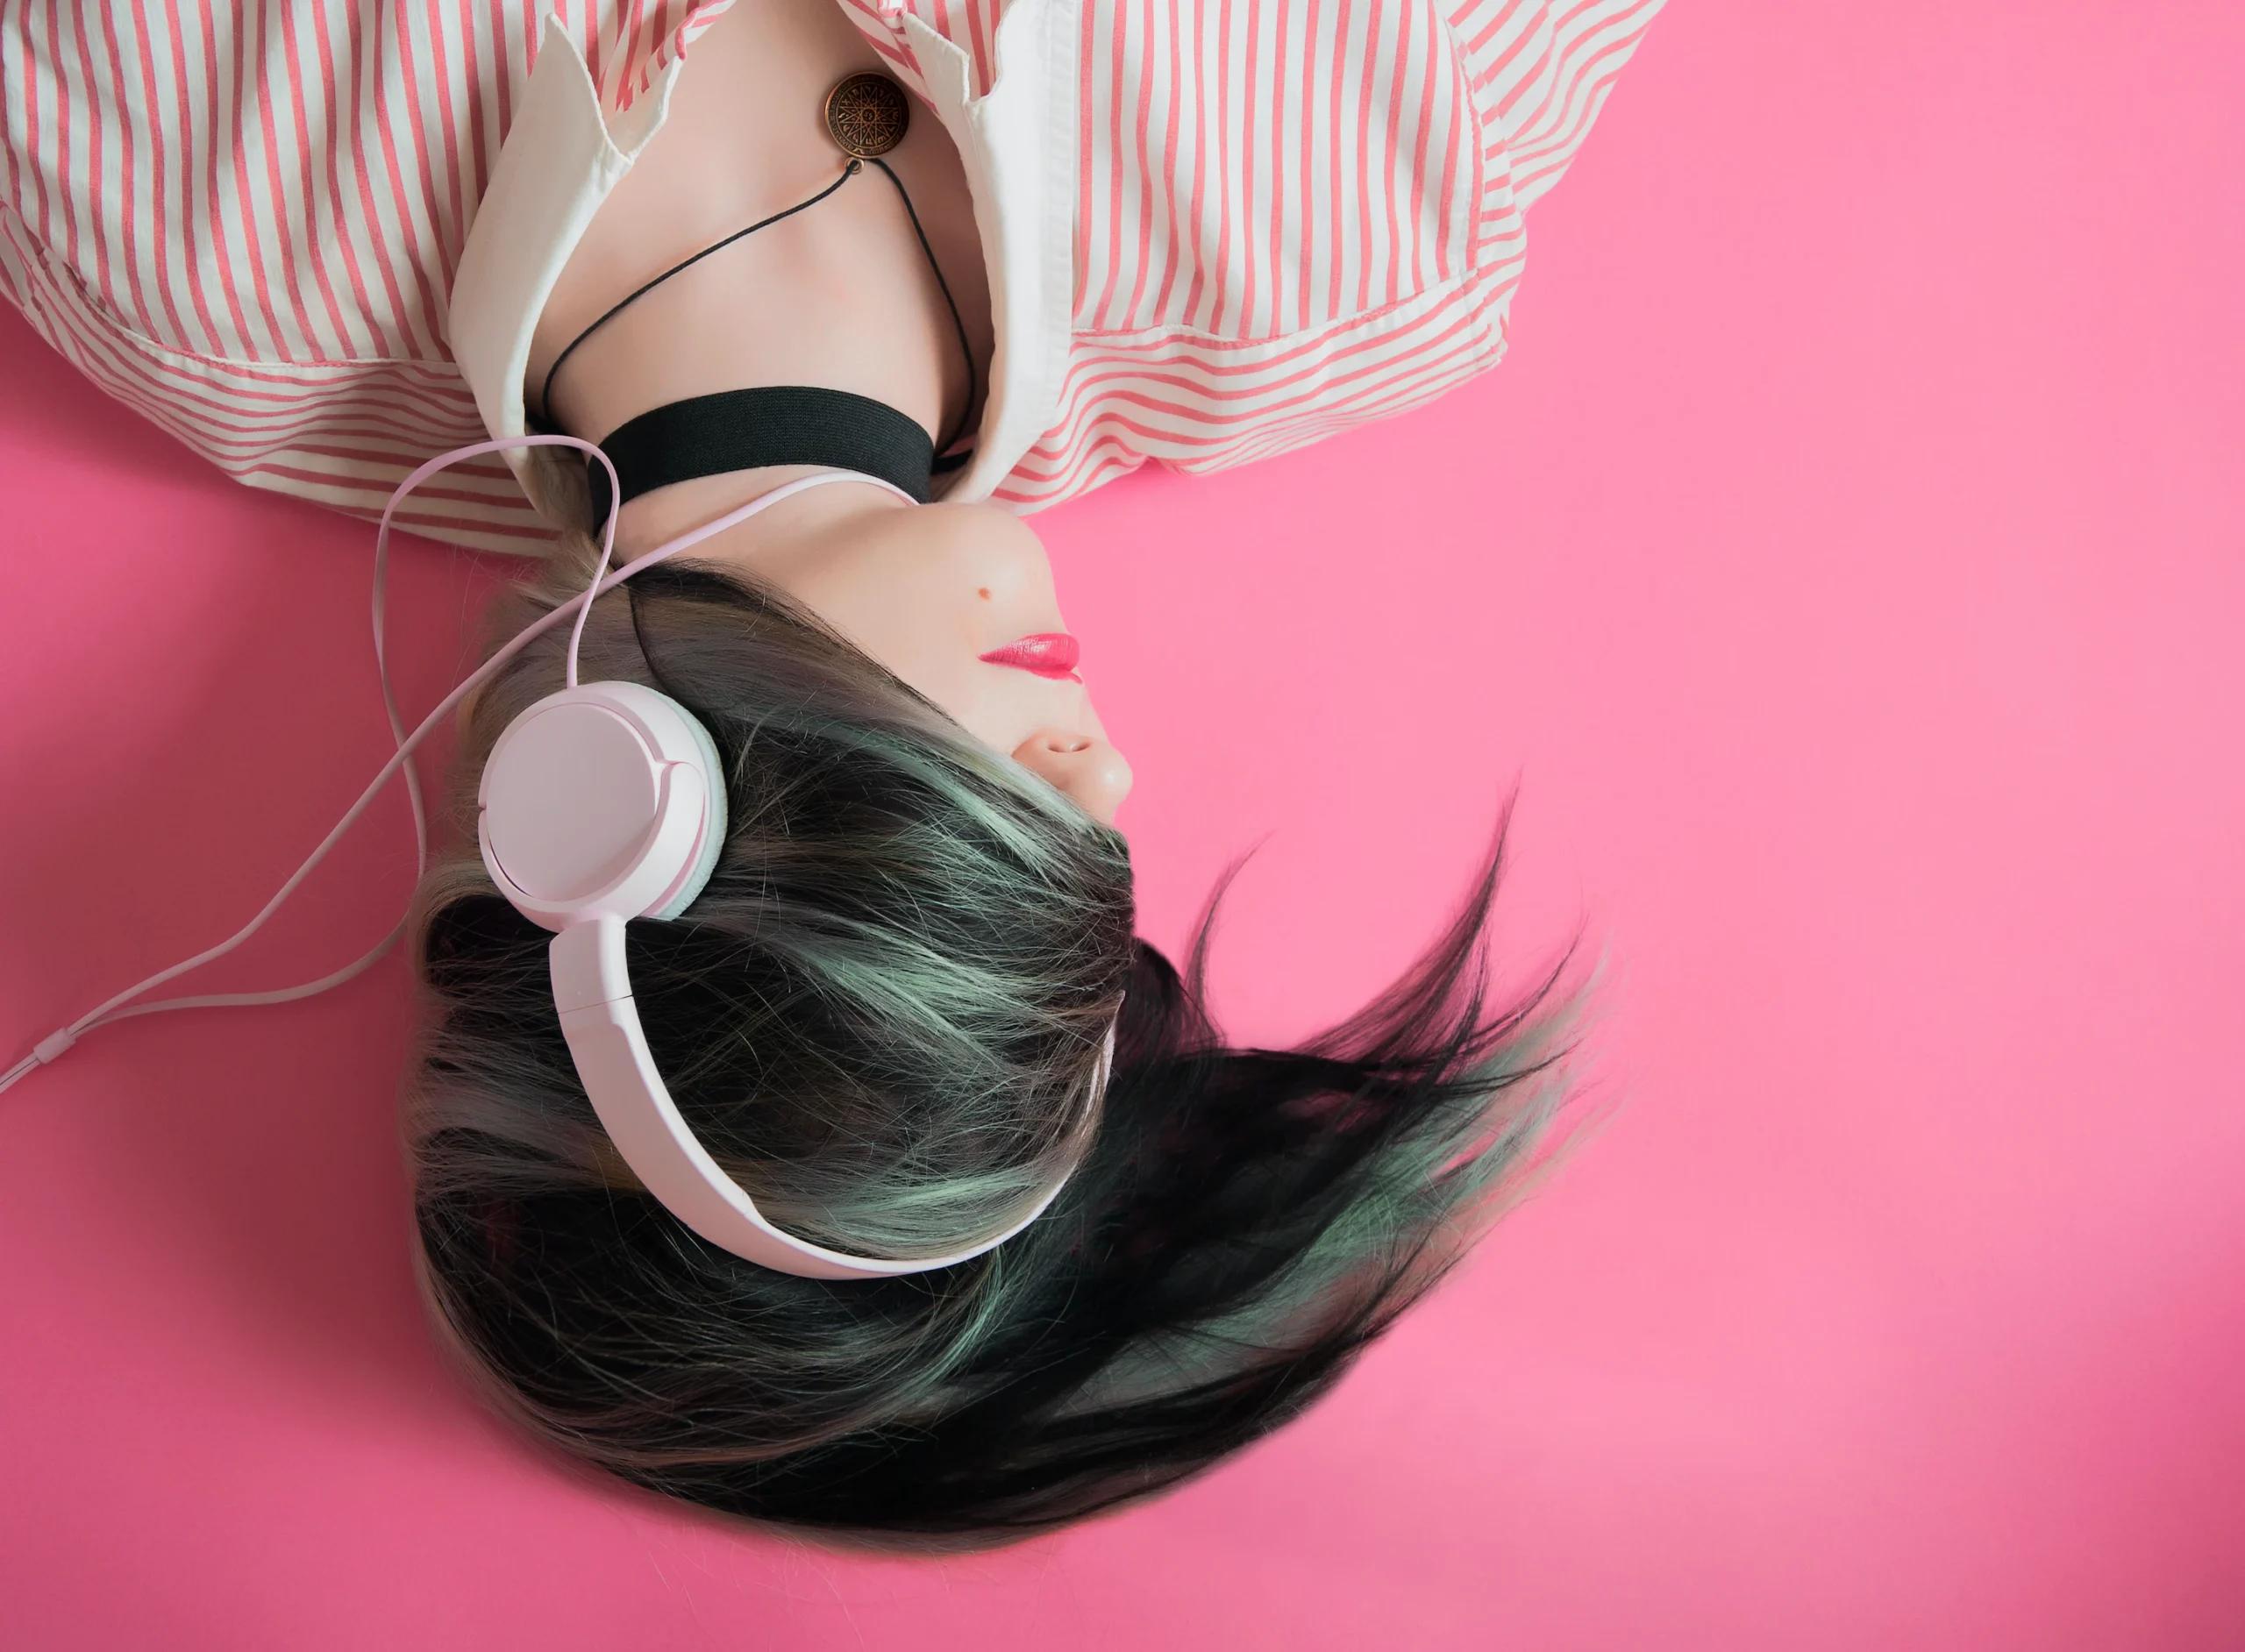 A person listening to music using purple headphones; pink background